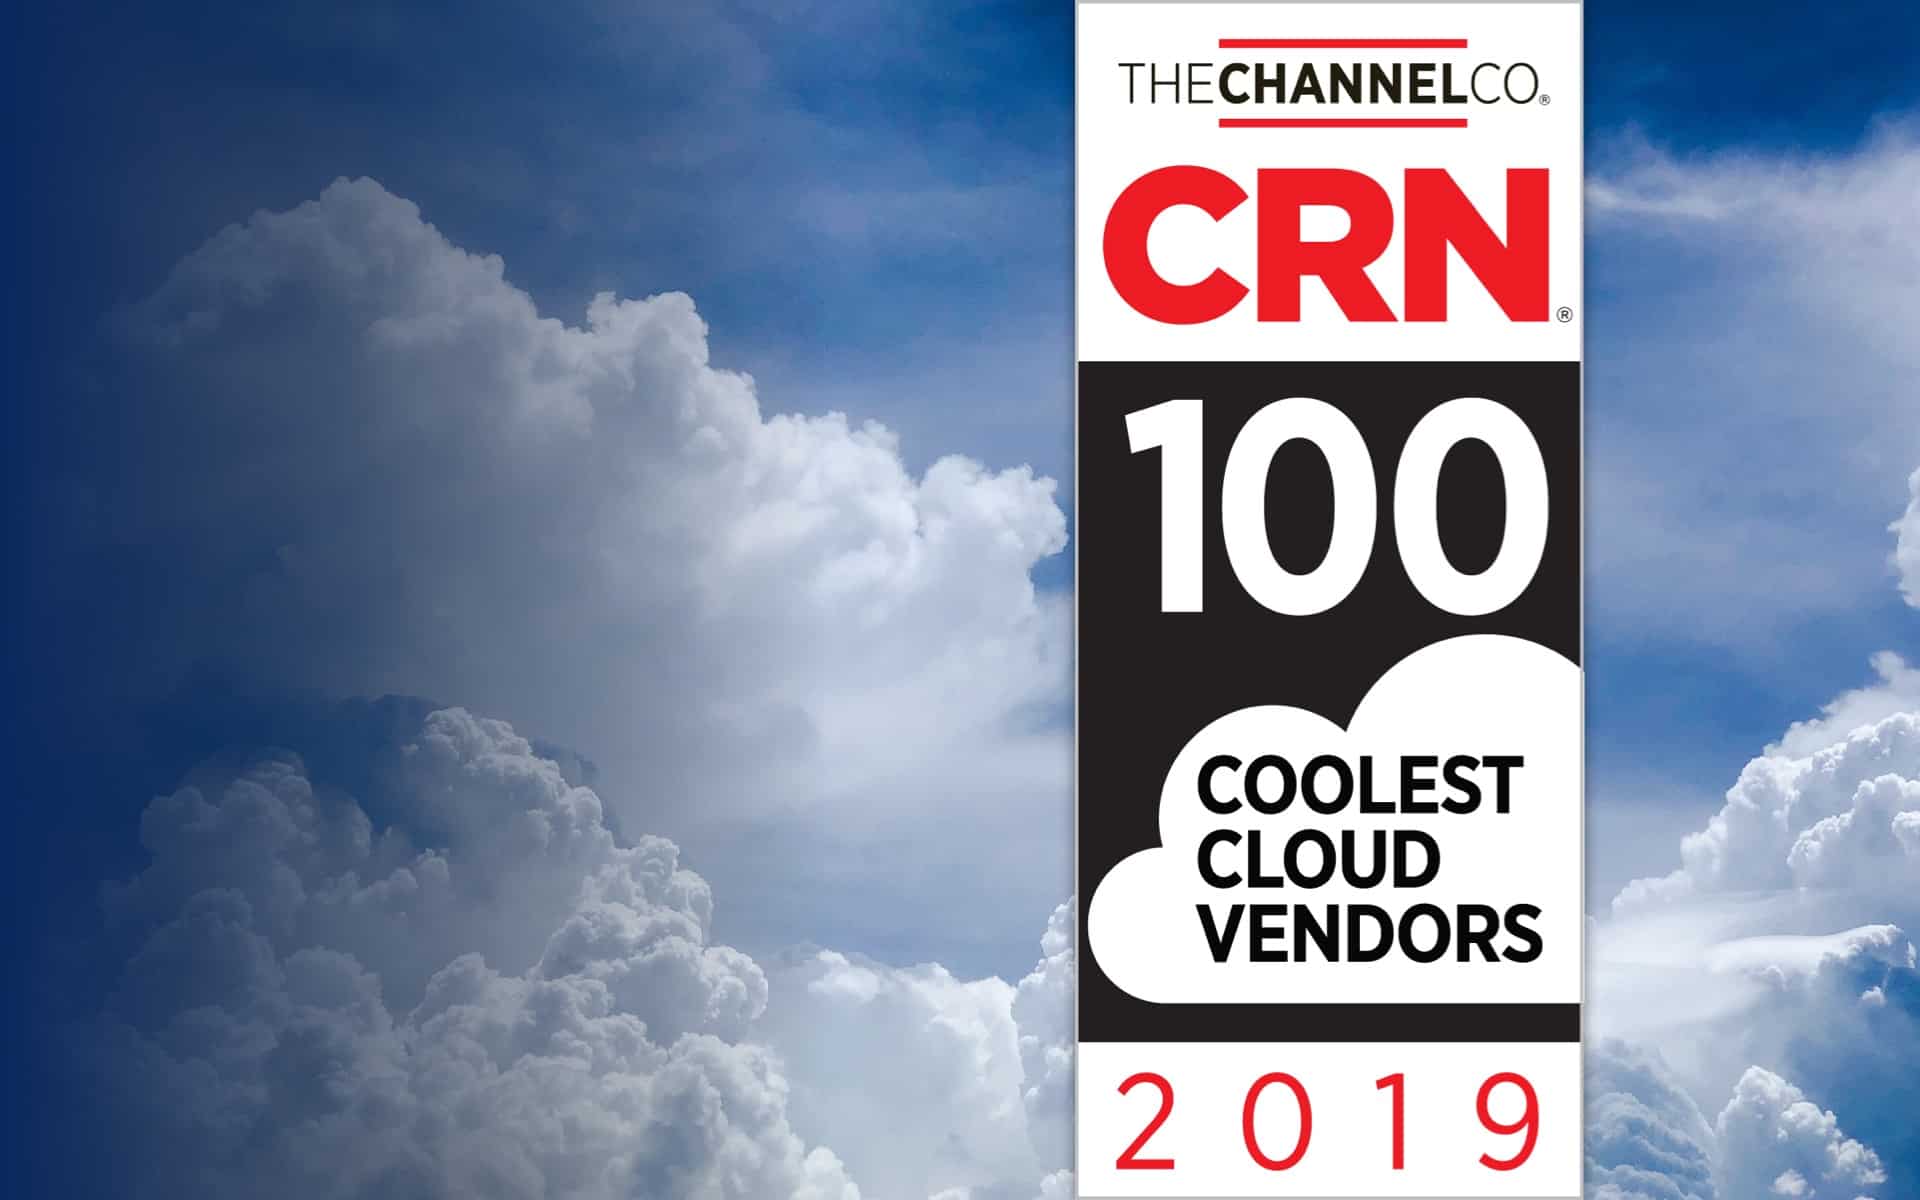 Unravel named to CRN's list of 100 coolest cloud companies of 2019